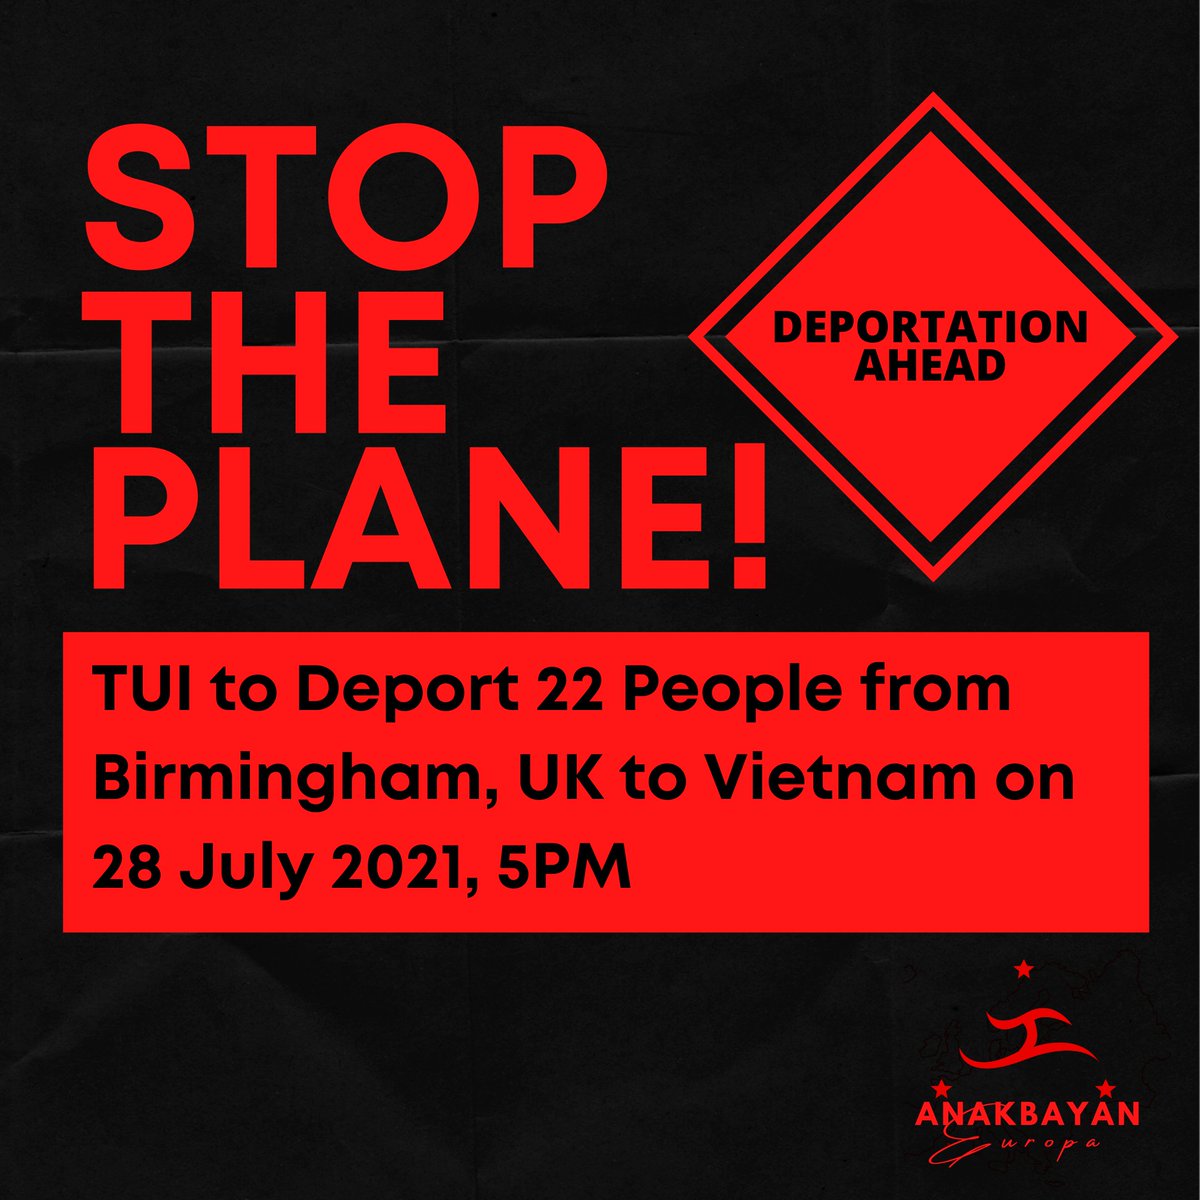 TUI have already carried out at least 8 deportation flights this year and we believe they or AirTanker  are due to conduct yet another deportation, this time to Vietnam, TODAY at 5.30pm. 

#StopThePlane #TUIDropDeportations #Vietnam22 #NoBorders #EndDeportations

1.3